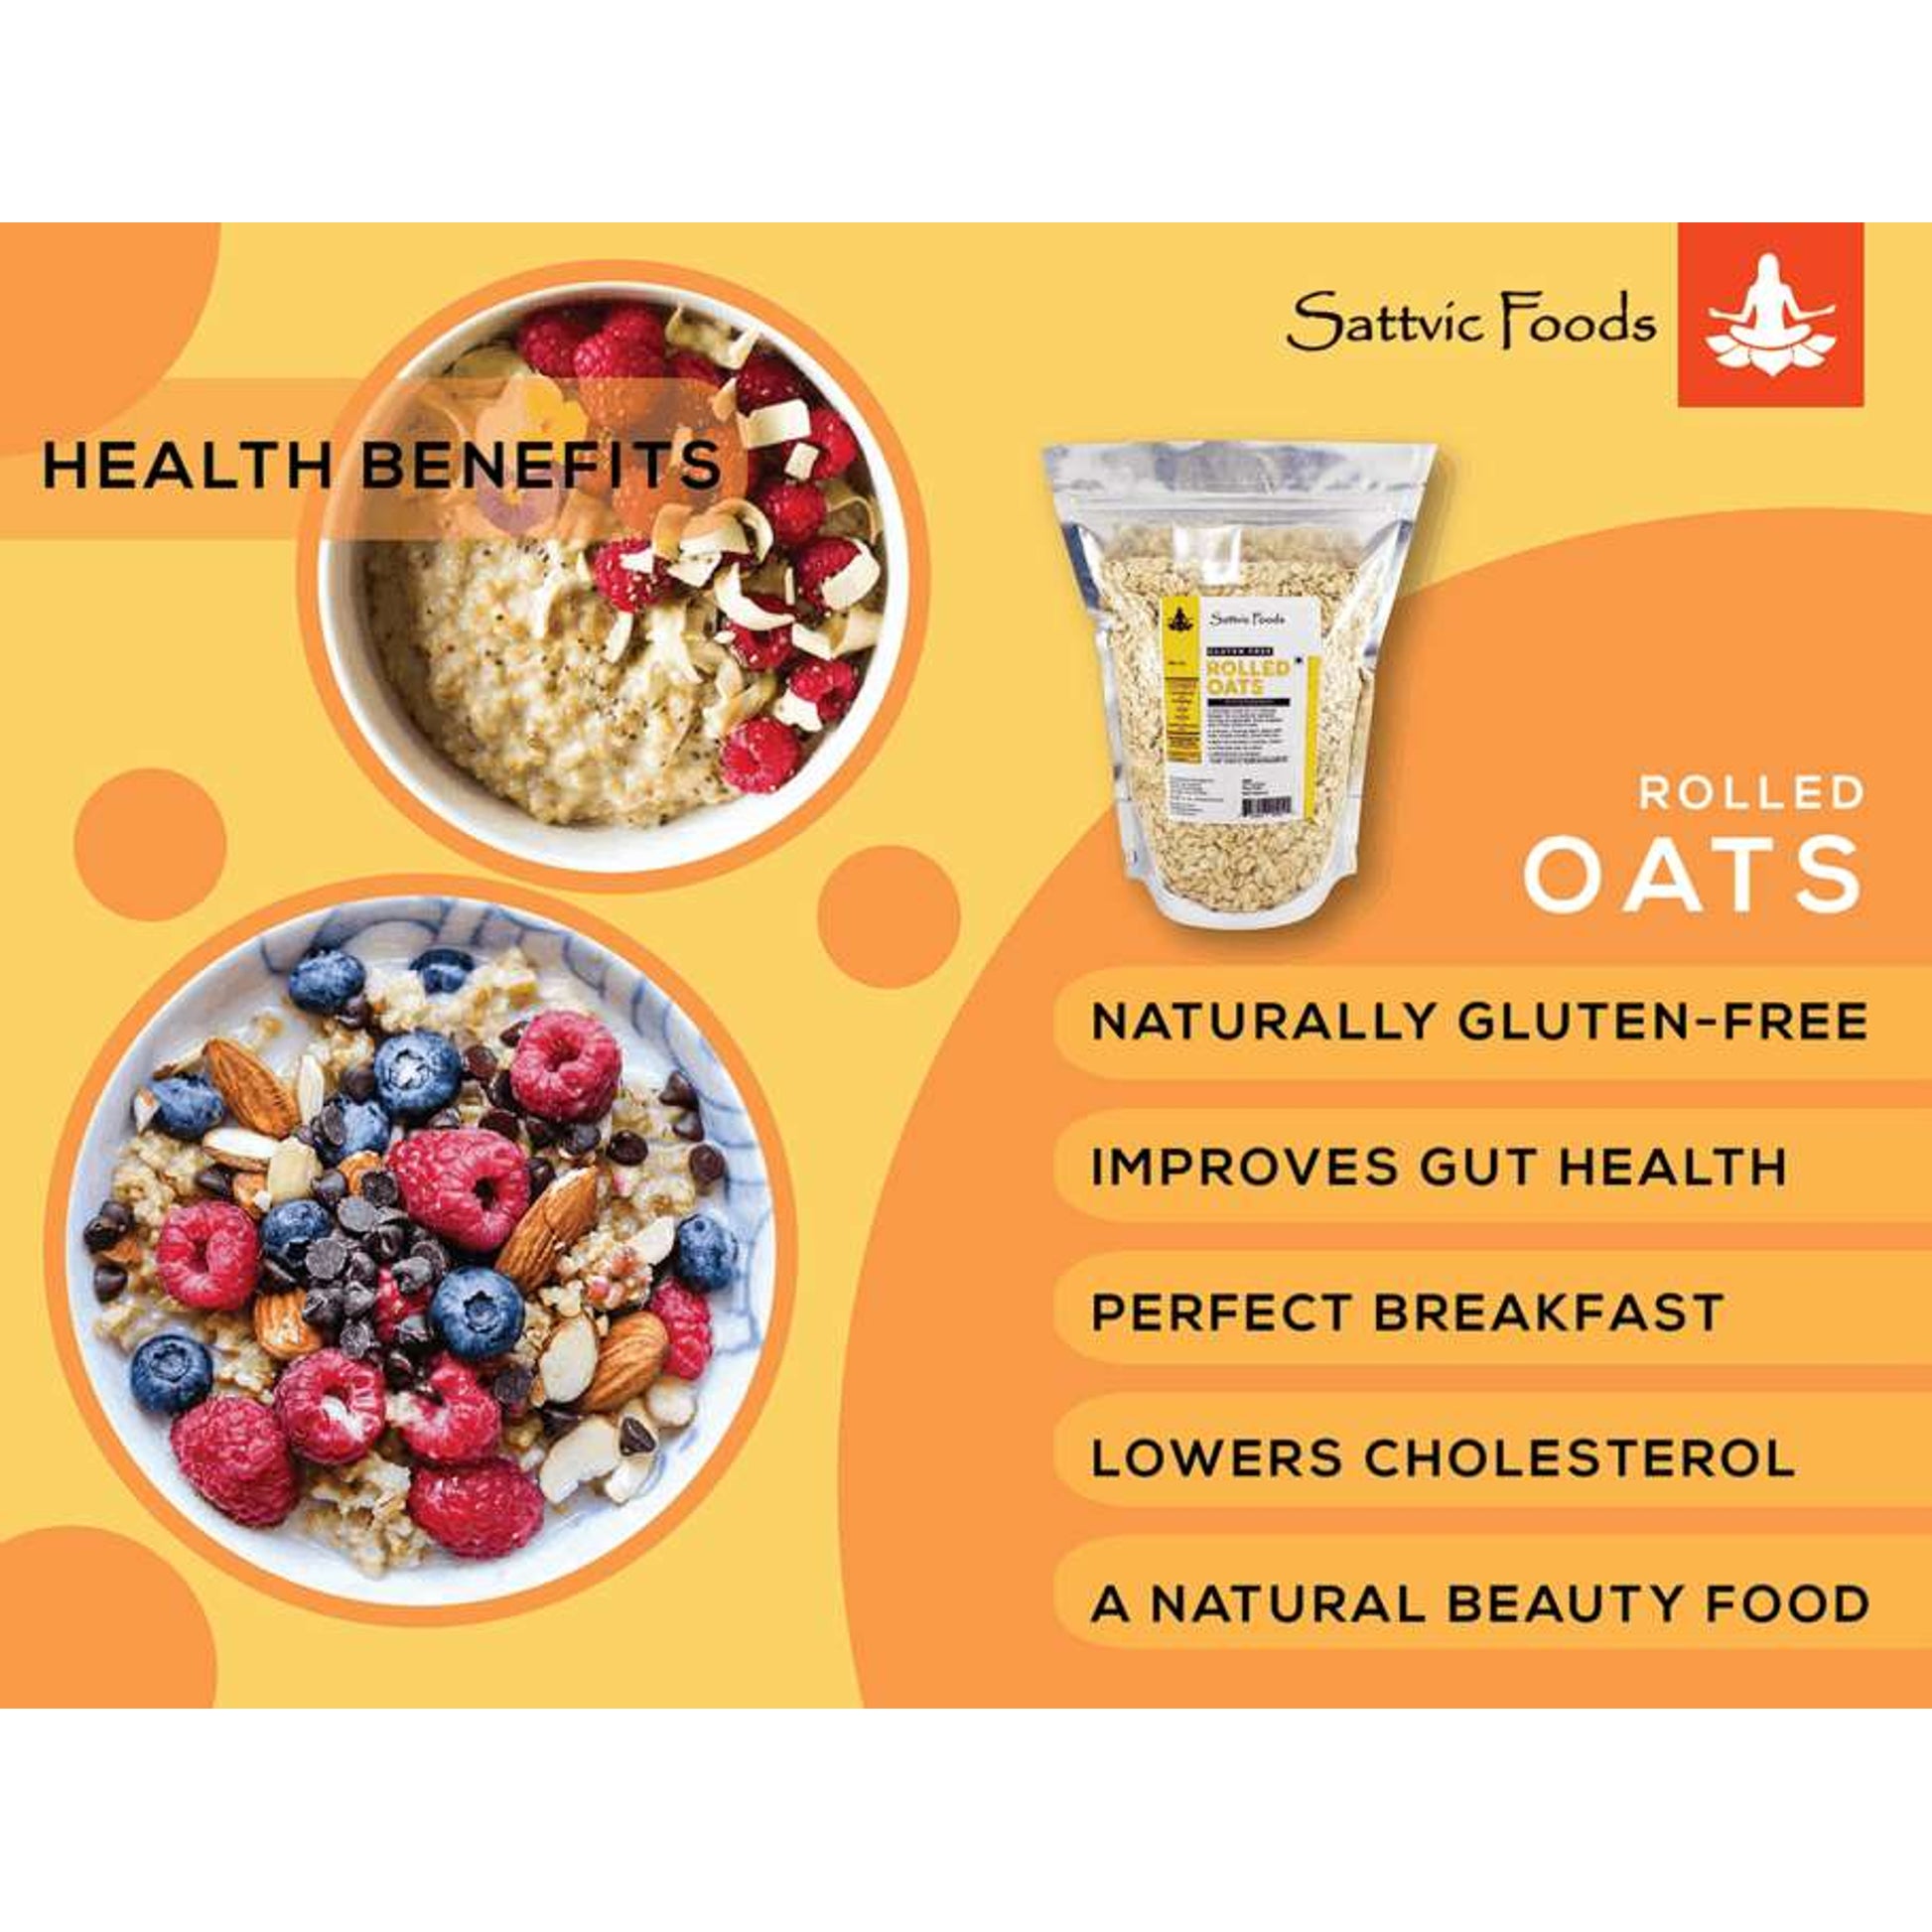 Rolled Oats (Gluten-free) Sattvic Foods